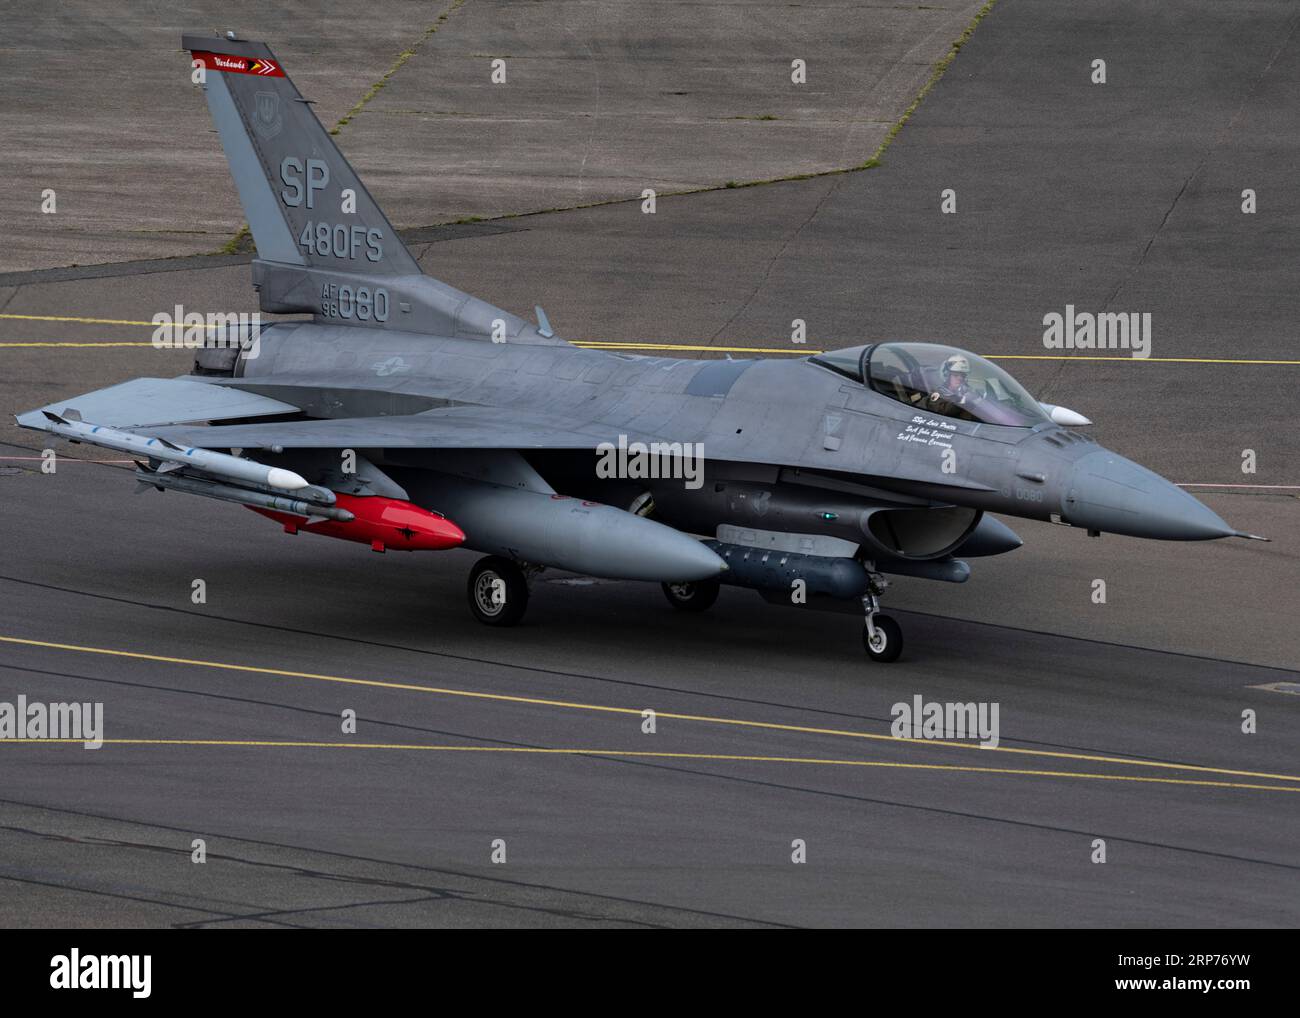 Mildenhall, United Kingdom. 29 August, 2023. A U.S. Air Force F-16CJ Fighting Falcon fighter aircraft assigned to the 52nd Fighter Wing, arrives at Royal Air Force Mildenhall to participate in Cobra Warrior 23-2 exercise, August 29, 2023 in Mildenhall, Suffolk, England.  Credit: A1C Alvaro Villagomez/Planetpix/Alamy Live News Stock Photo